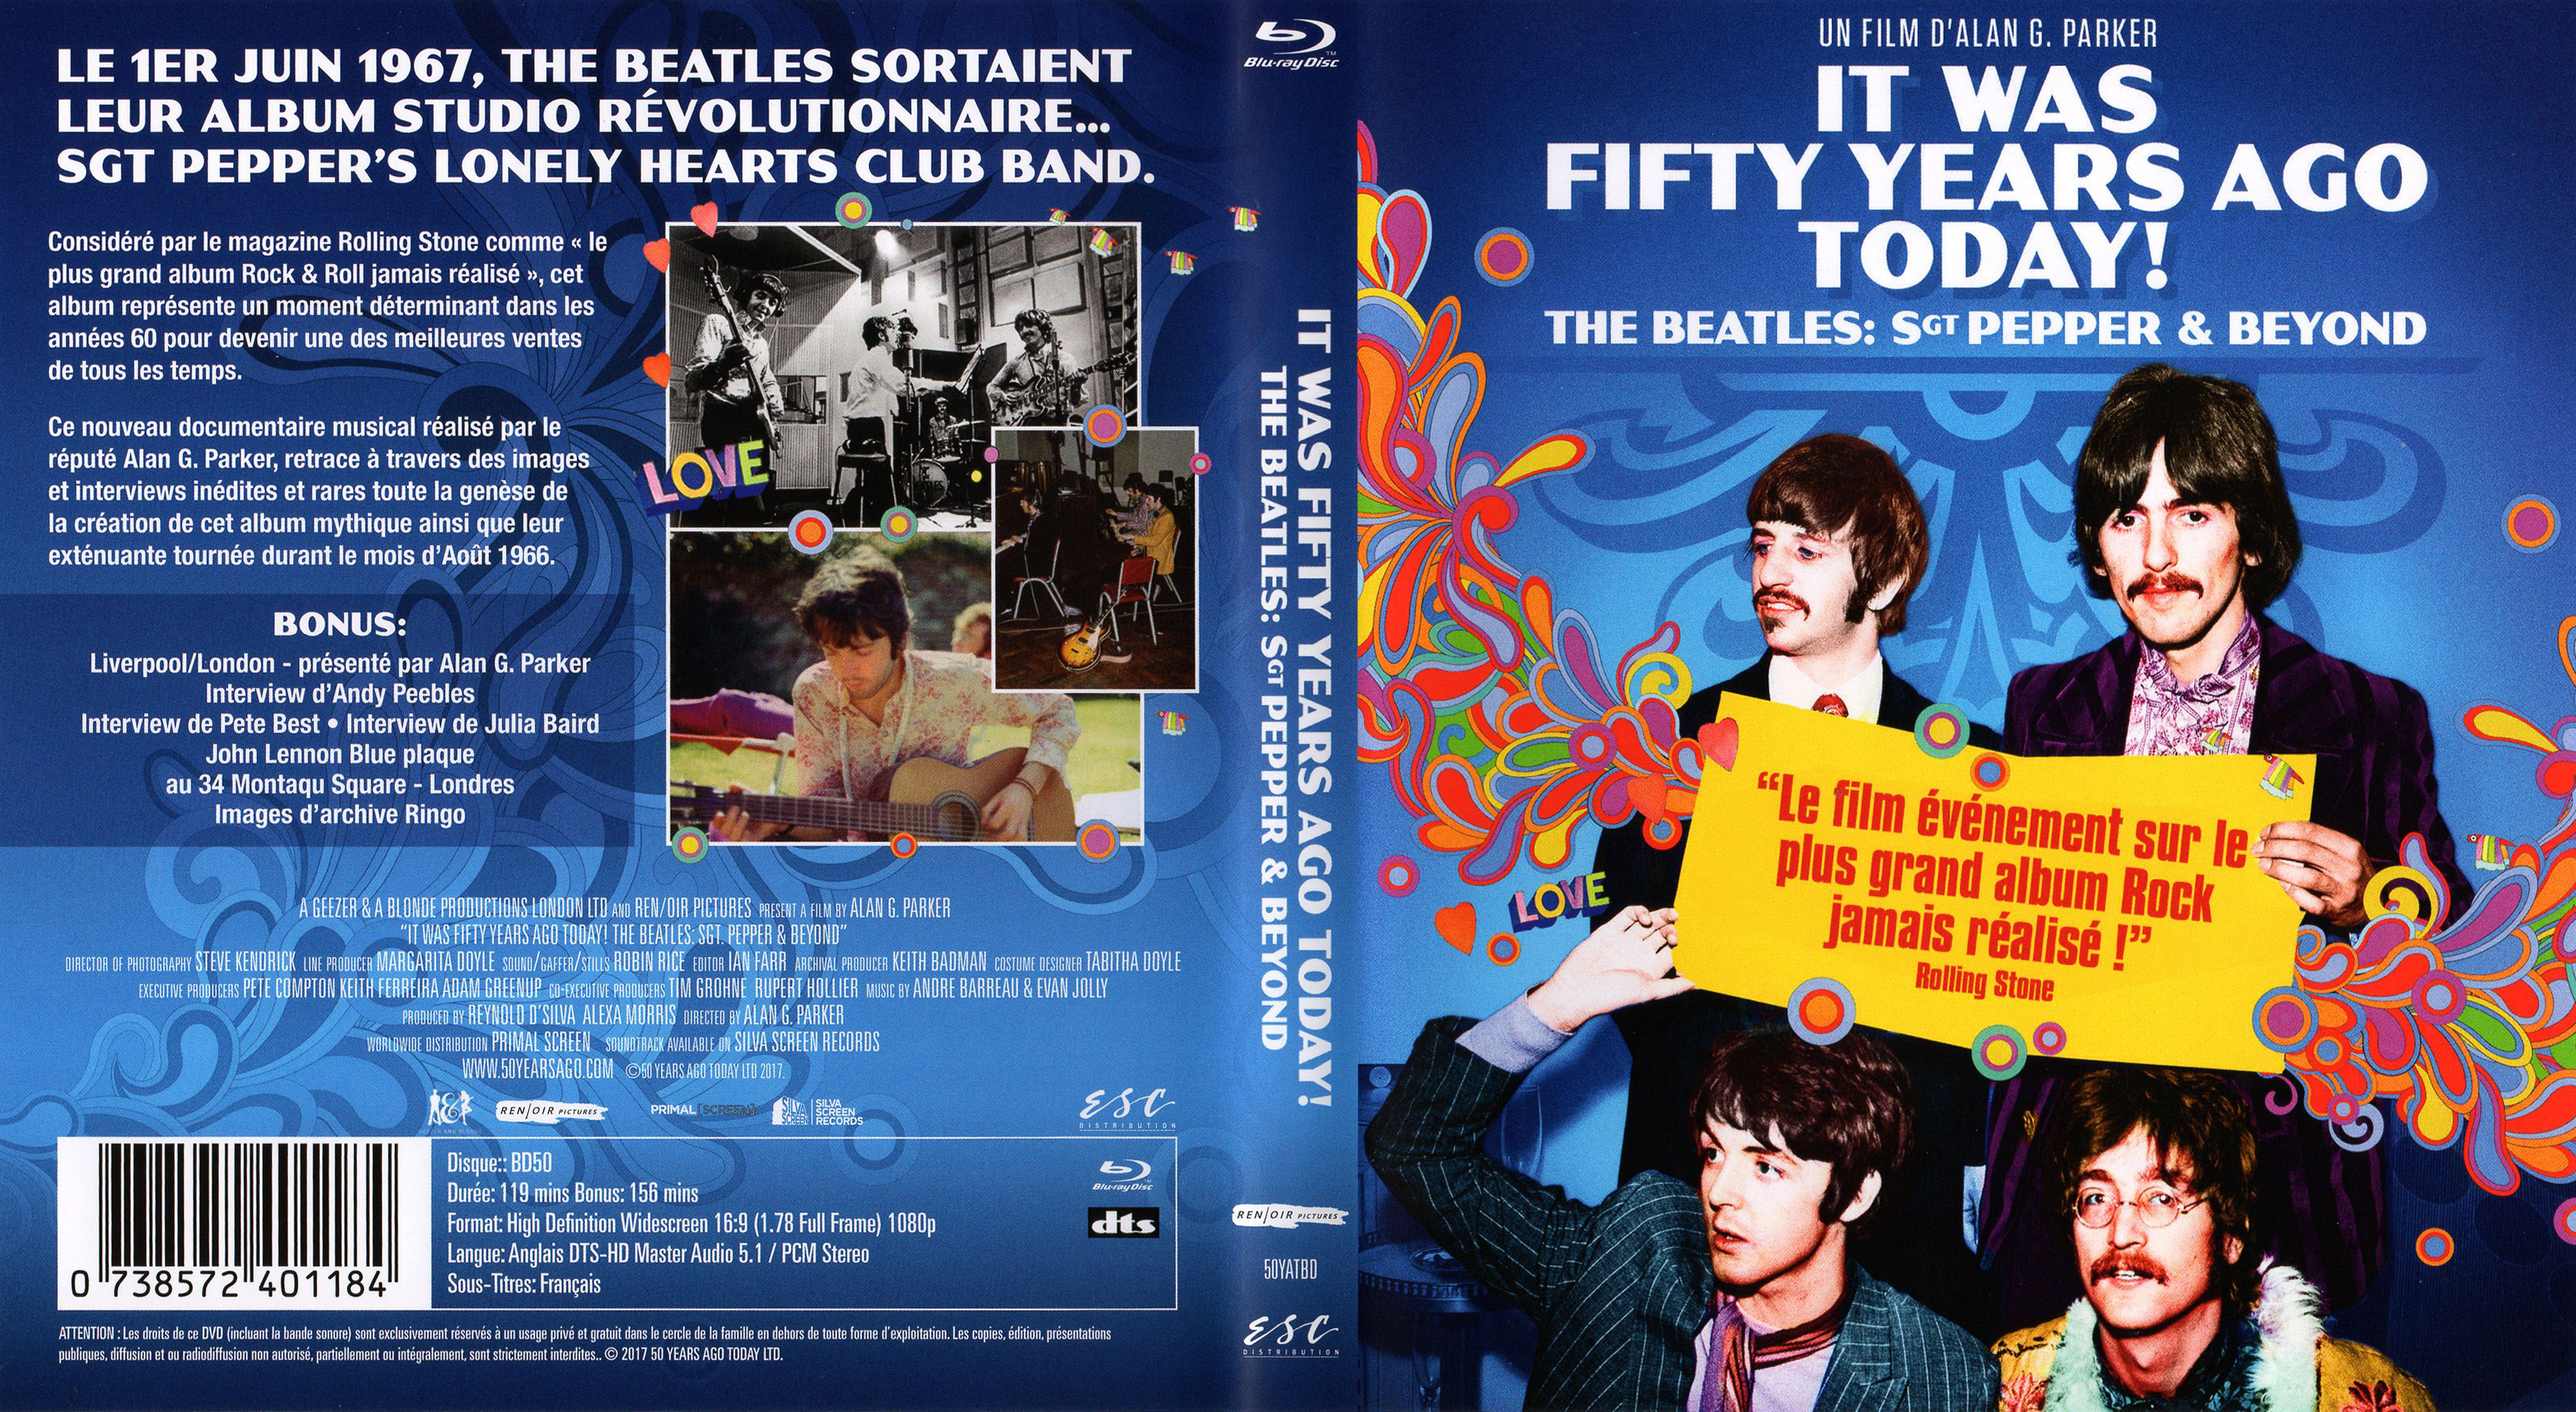 Jaquette DVD It was fifty years ago today (BLU-RAY)